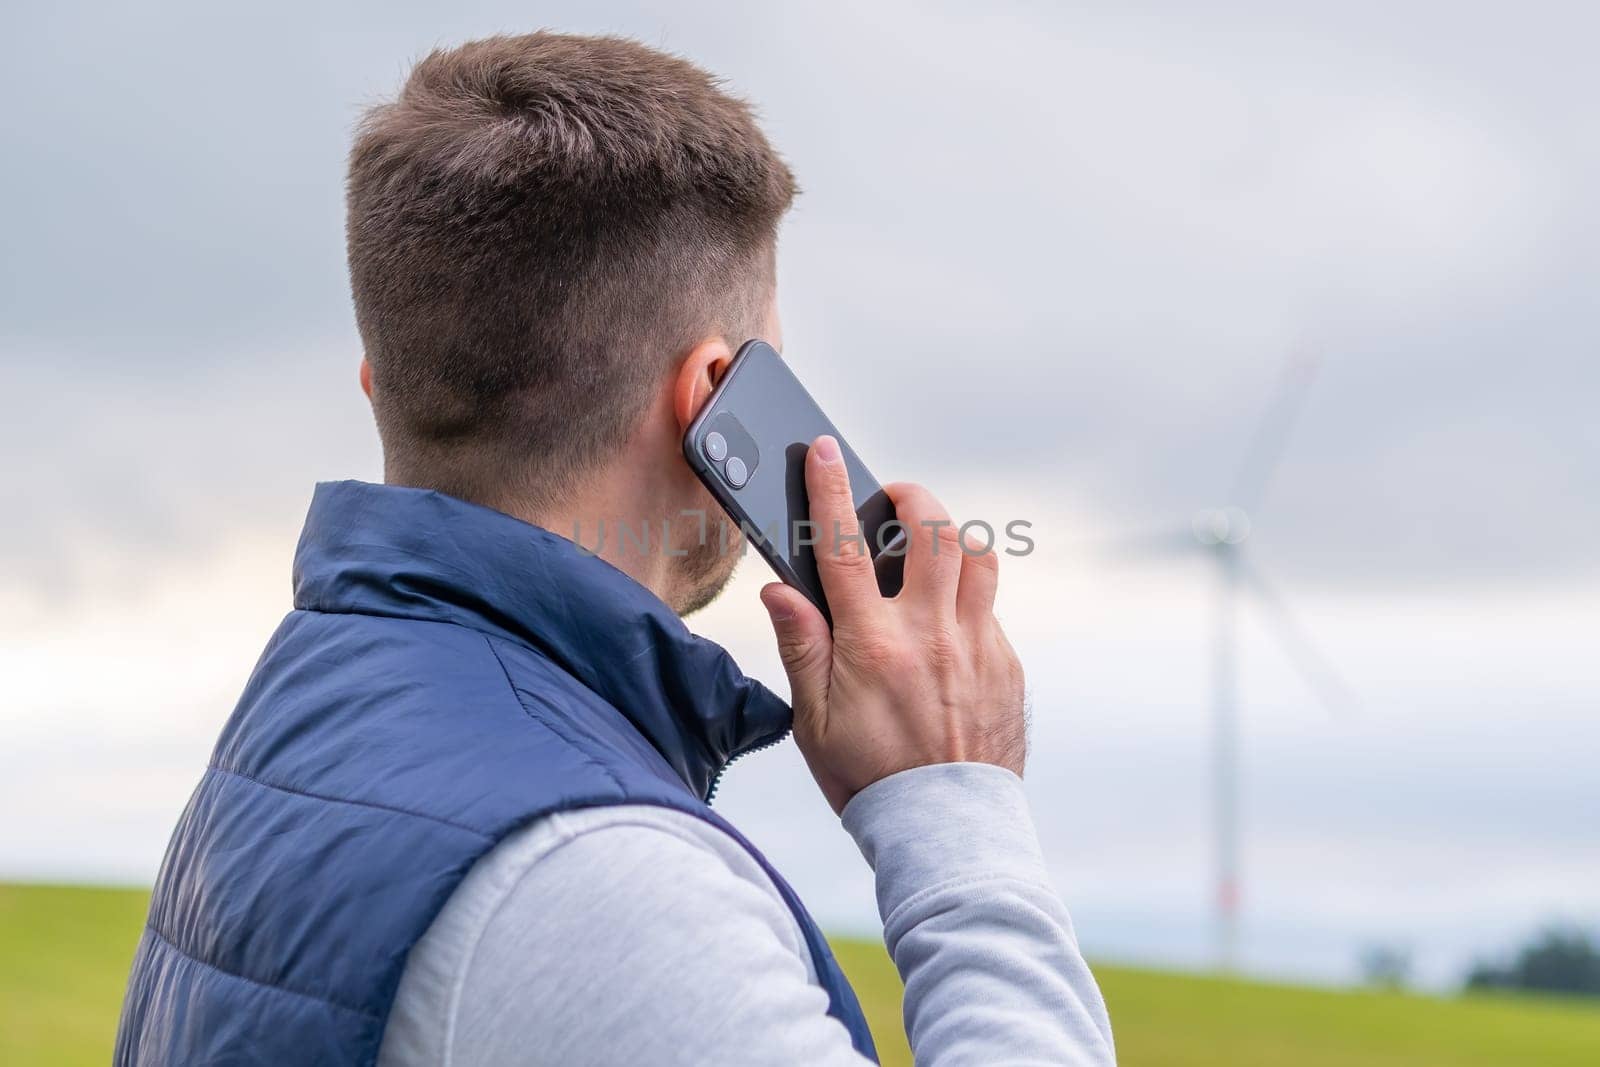 Man engineer reports about functioning wind turbine via smartphone looking at windmill. Wind turbine produces green energy against grey sky